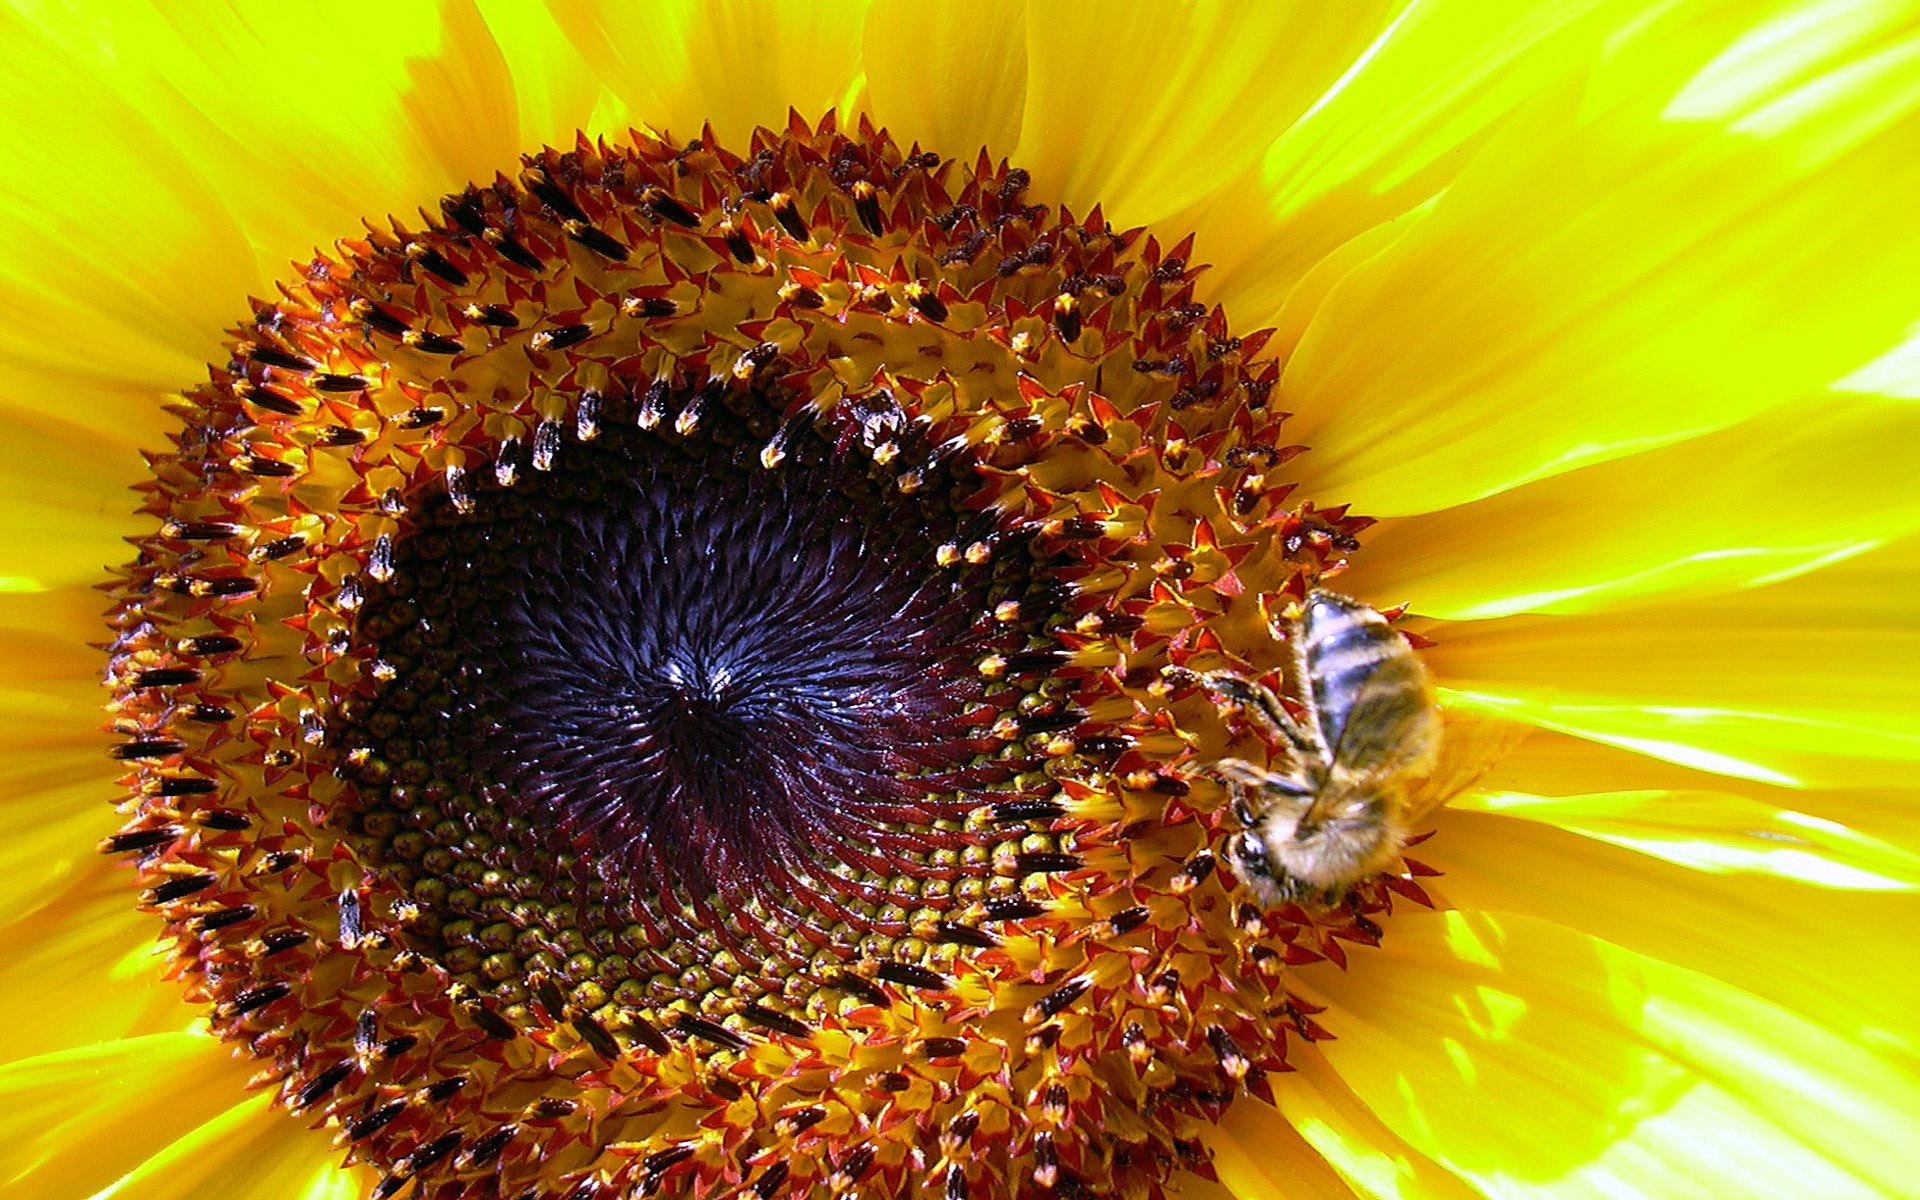 General 1920x1200 sunflowers macro bees yellow nature yellow flowers insect plants animals closeup